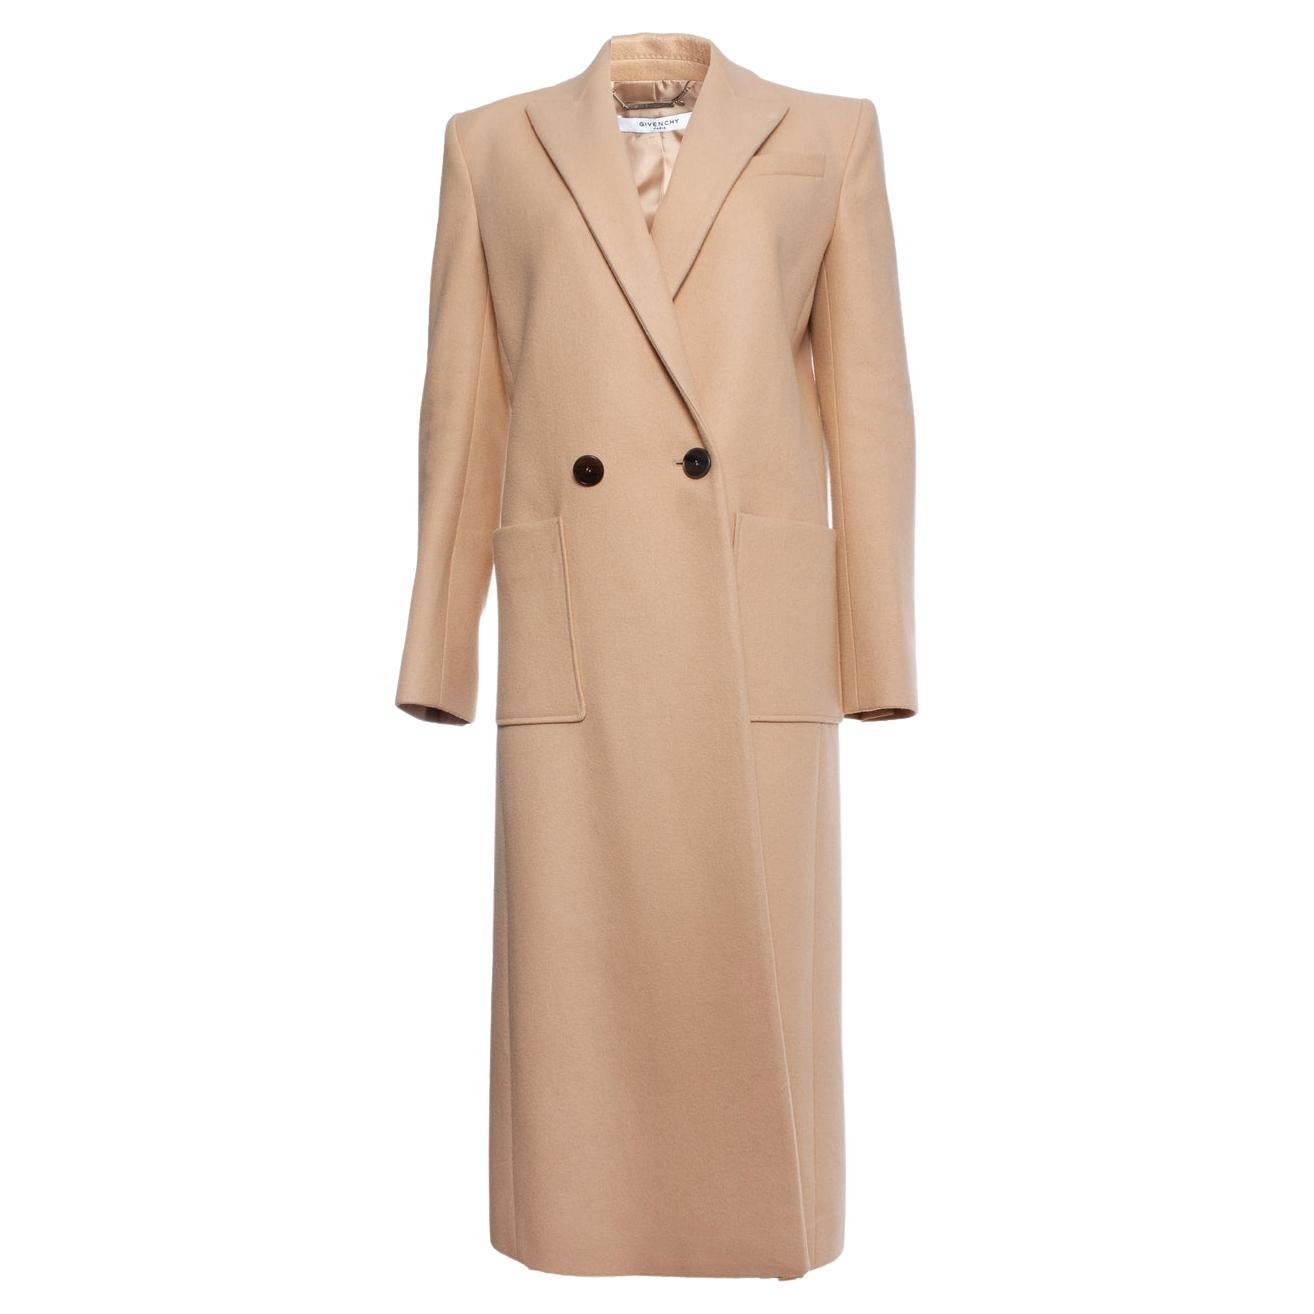 Givenchy, Beige long wool coat